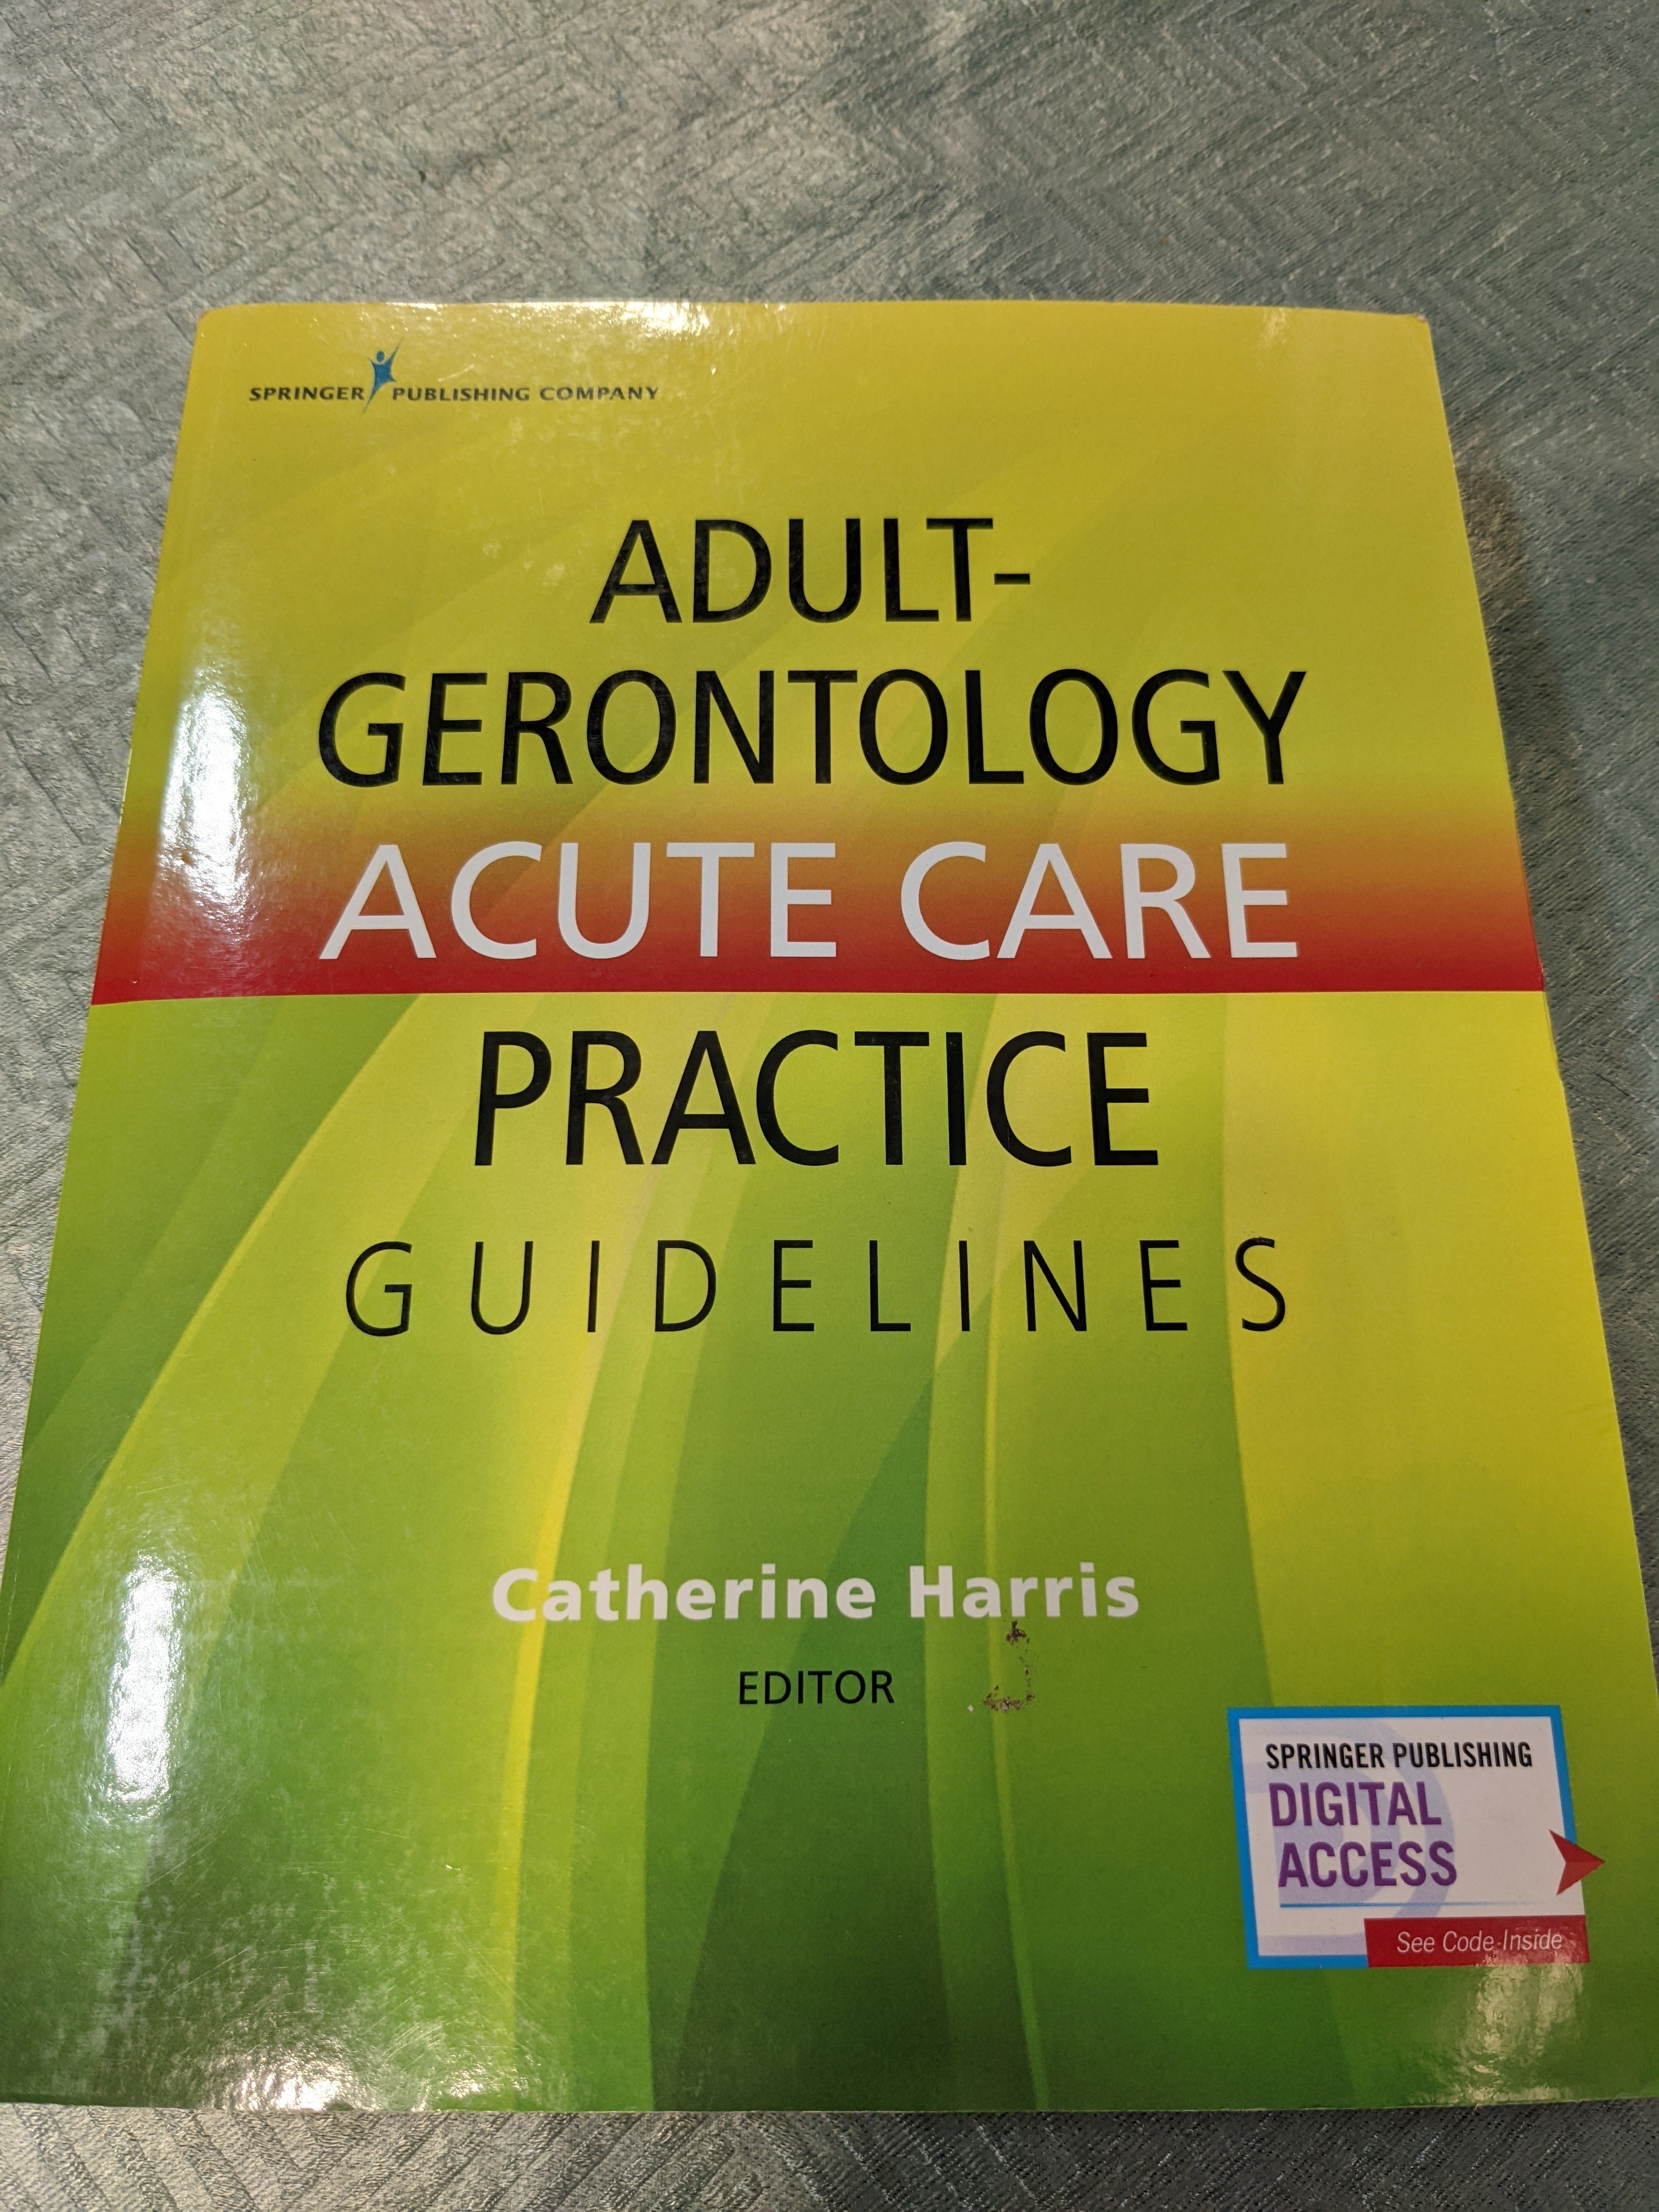 Adult-Gerontology Acute Care Practice Guidelines – Quick-Reference Gerontology Book for Nurse Practitioners, Includes over 90 Common Conditions, ACNP Review with eBook Access Included (7579847491822)